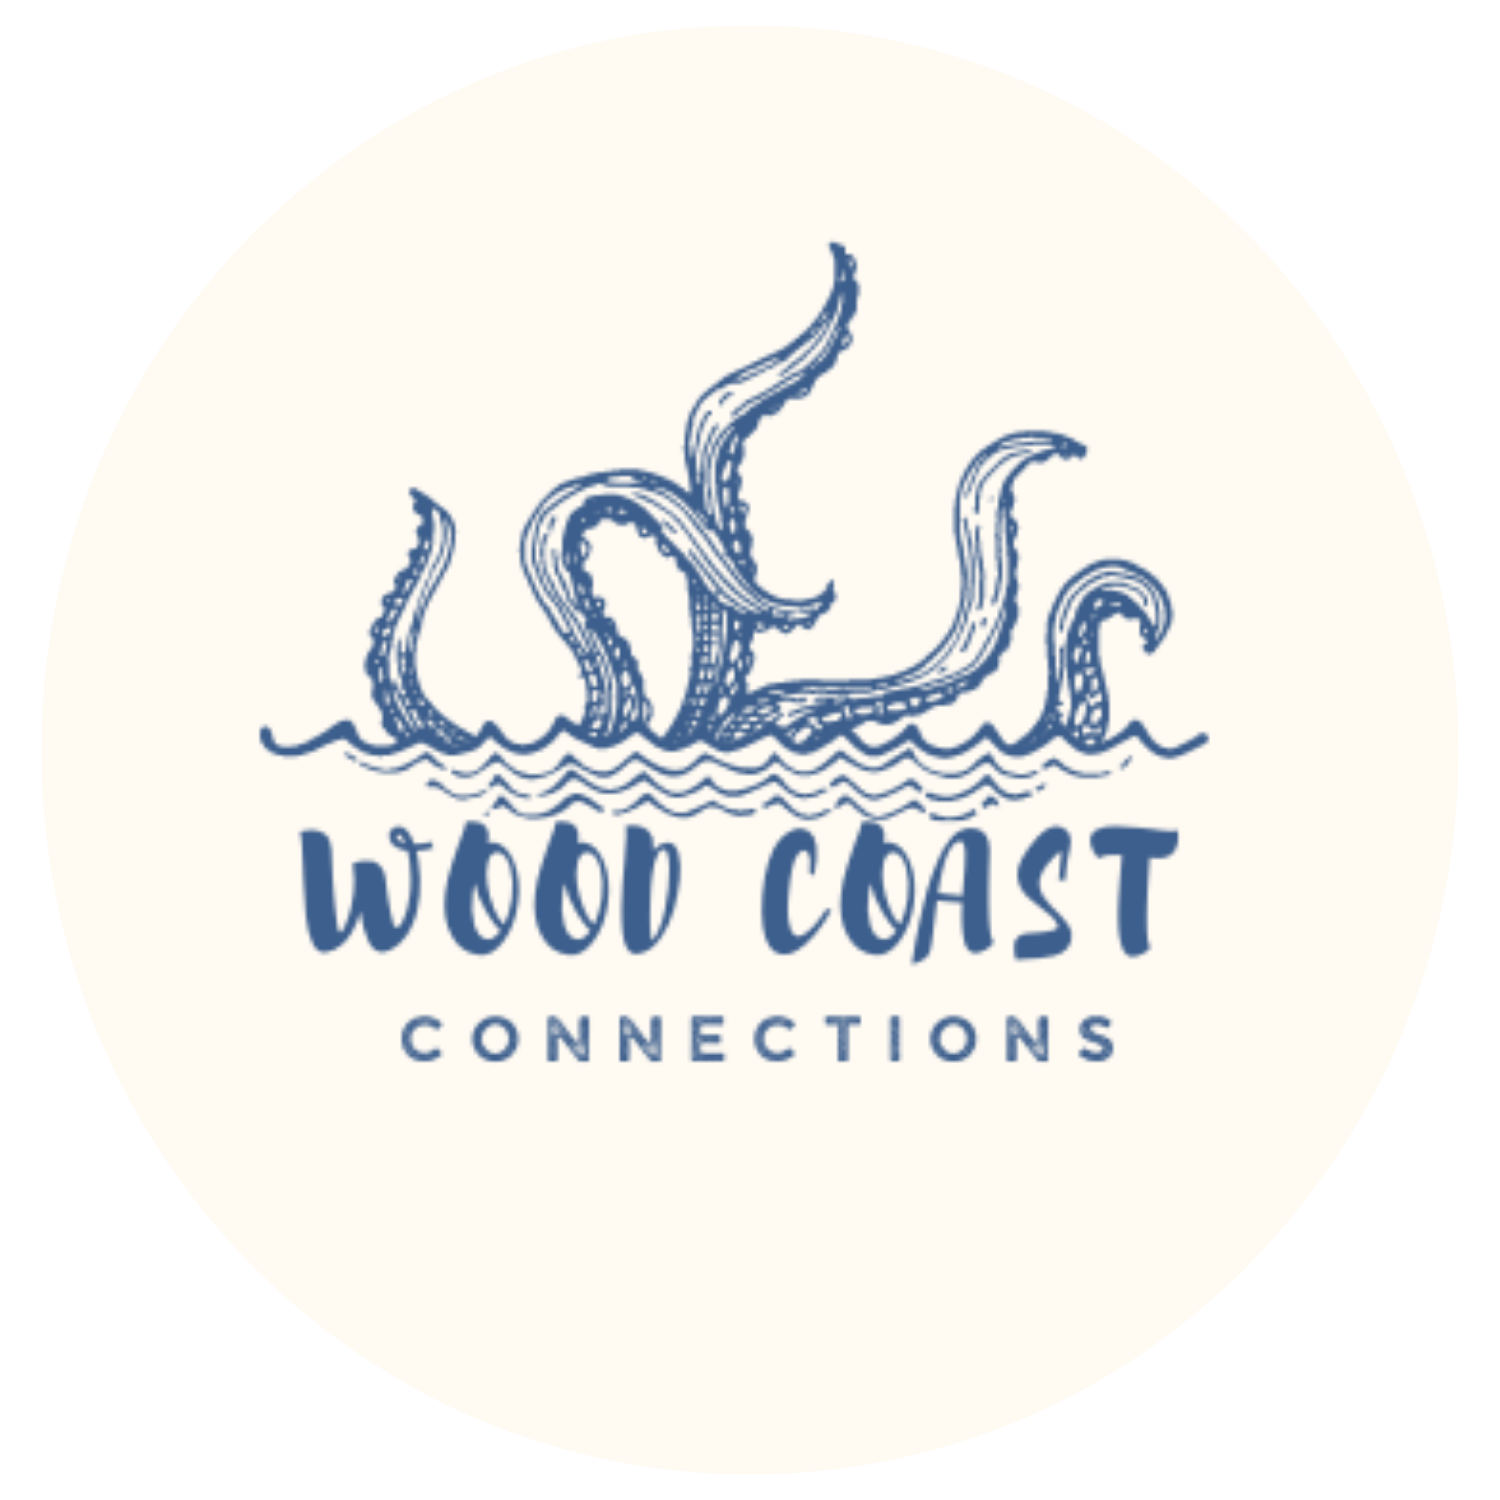                 Wood Coast Connections